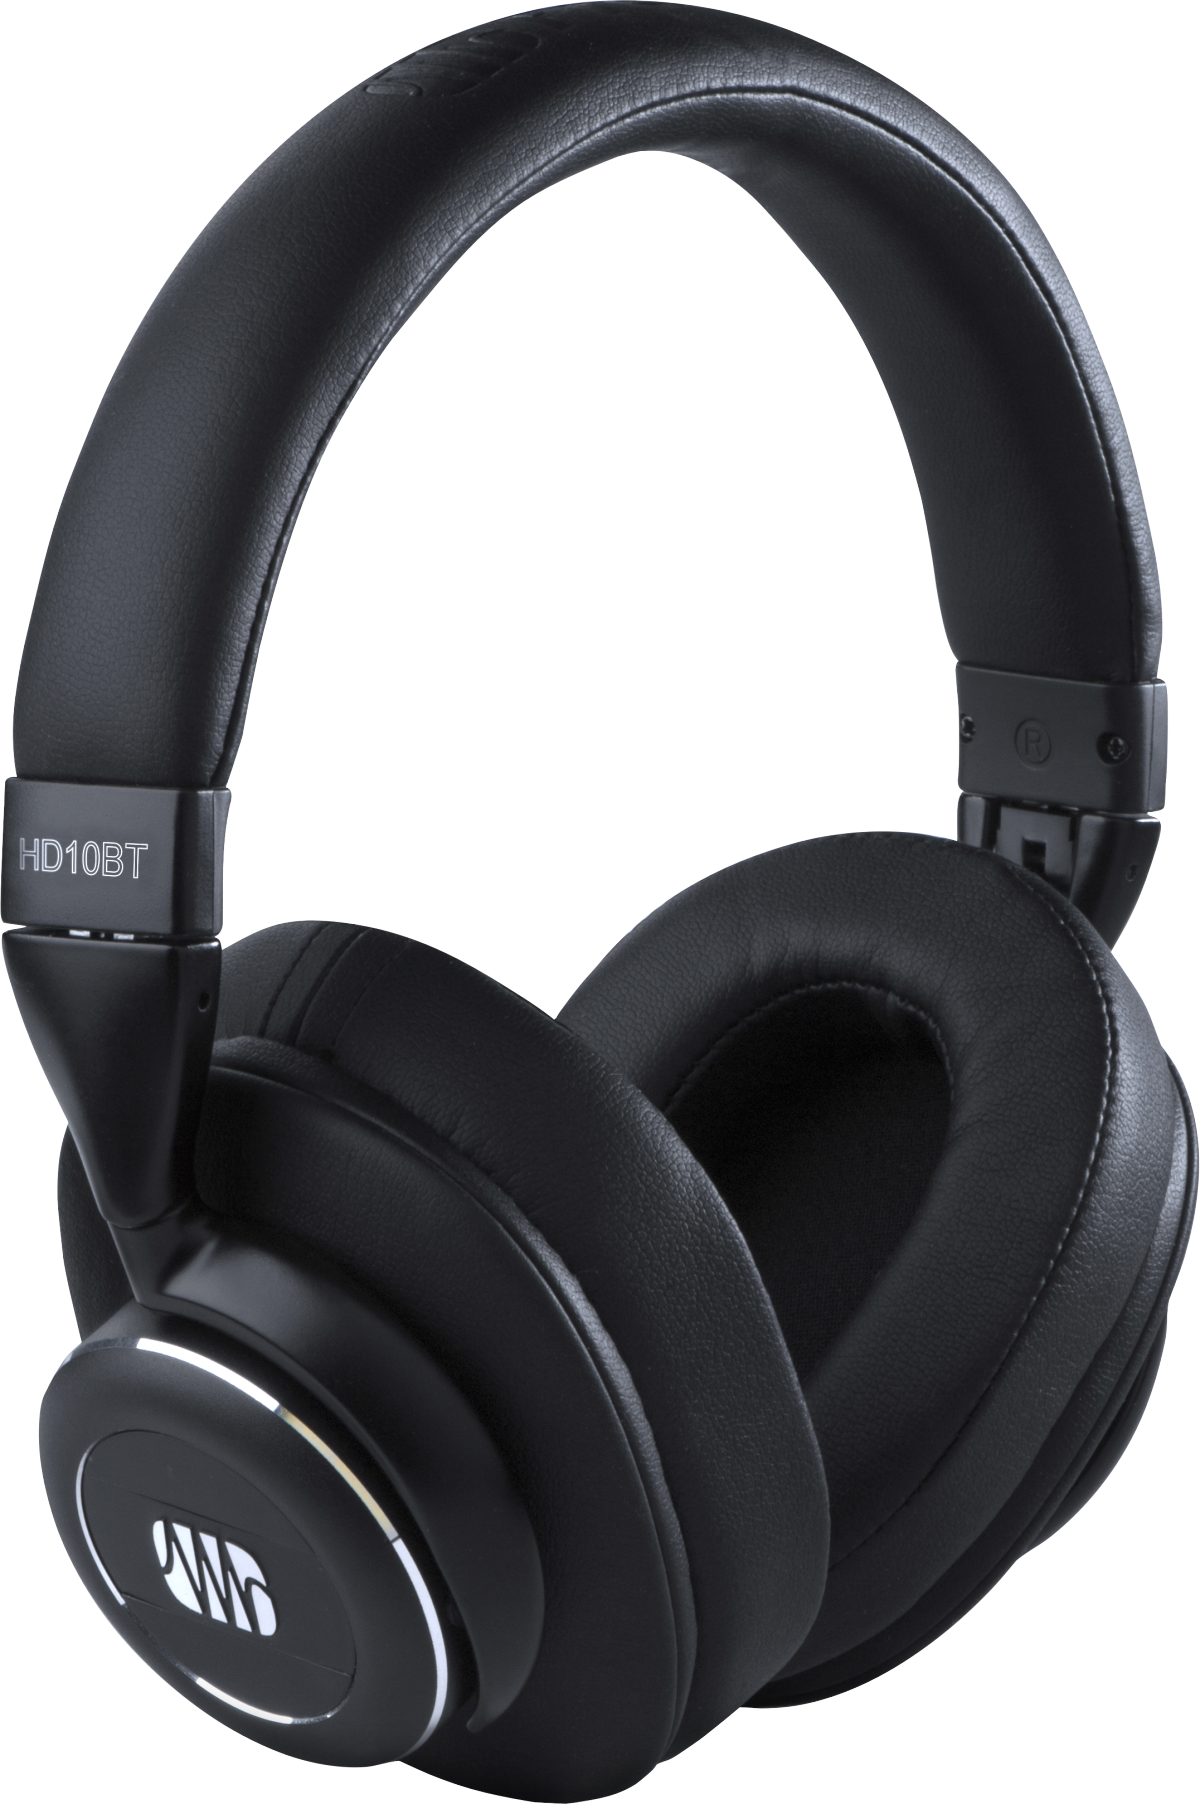 PreSonus® HD10BT Professional Headphones with Active Noise Canceling and Bluetooth® Wireless Technology 2777200101